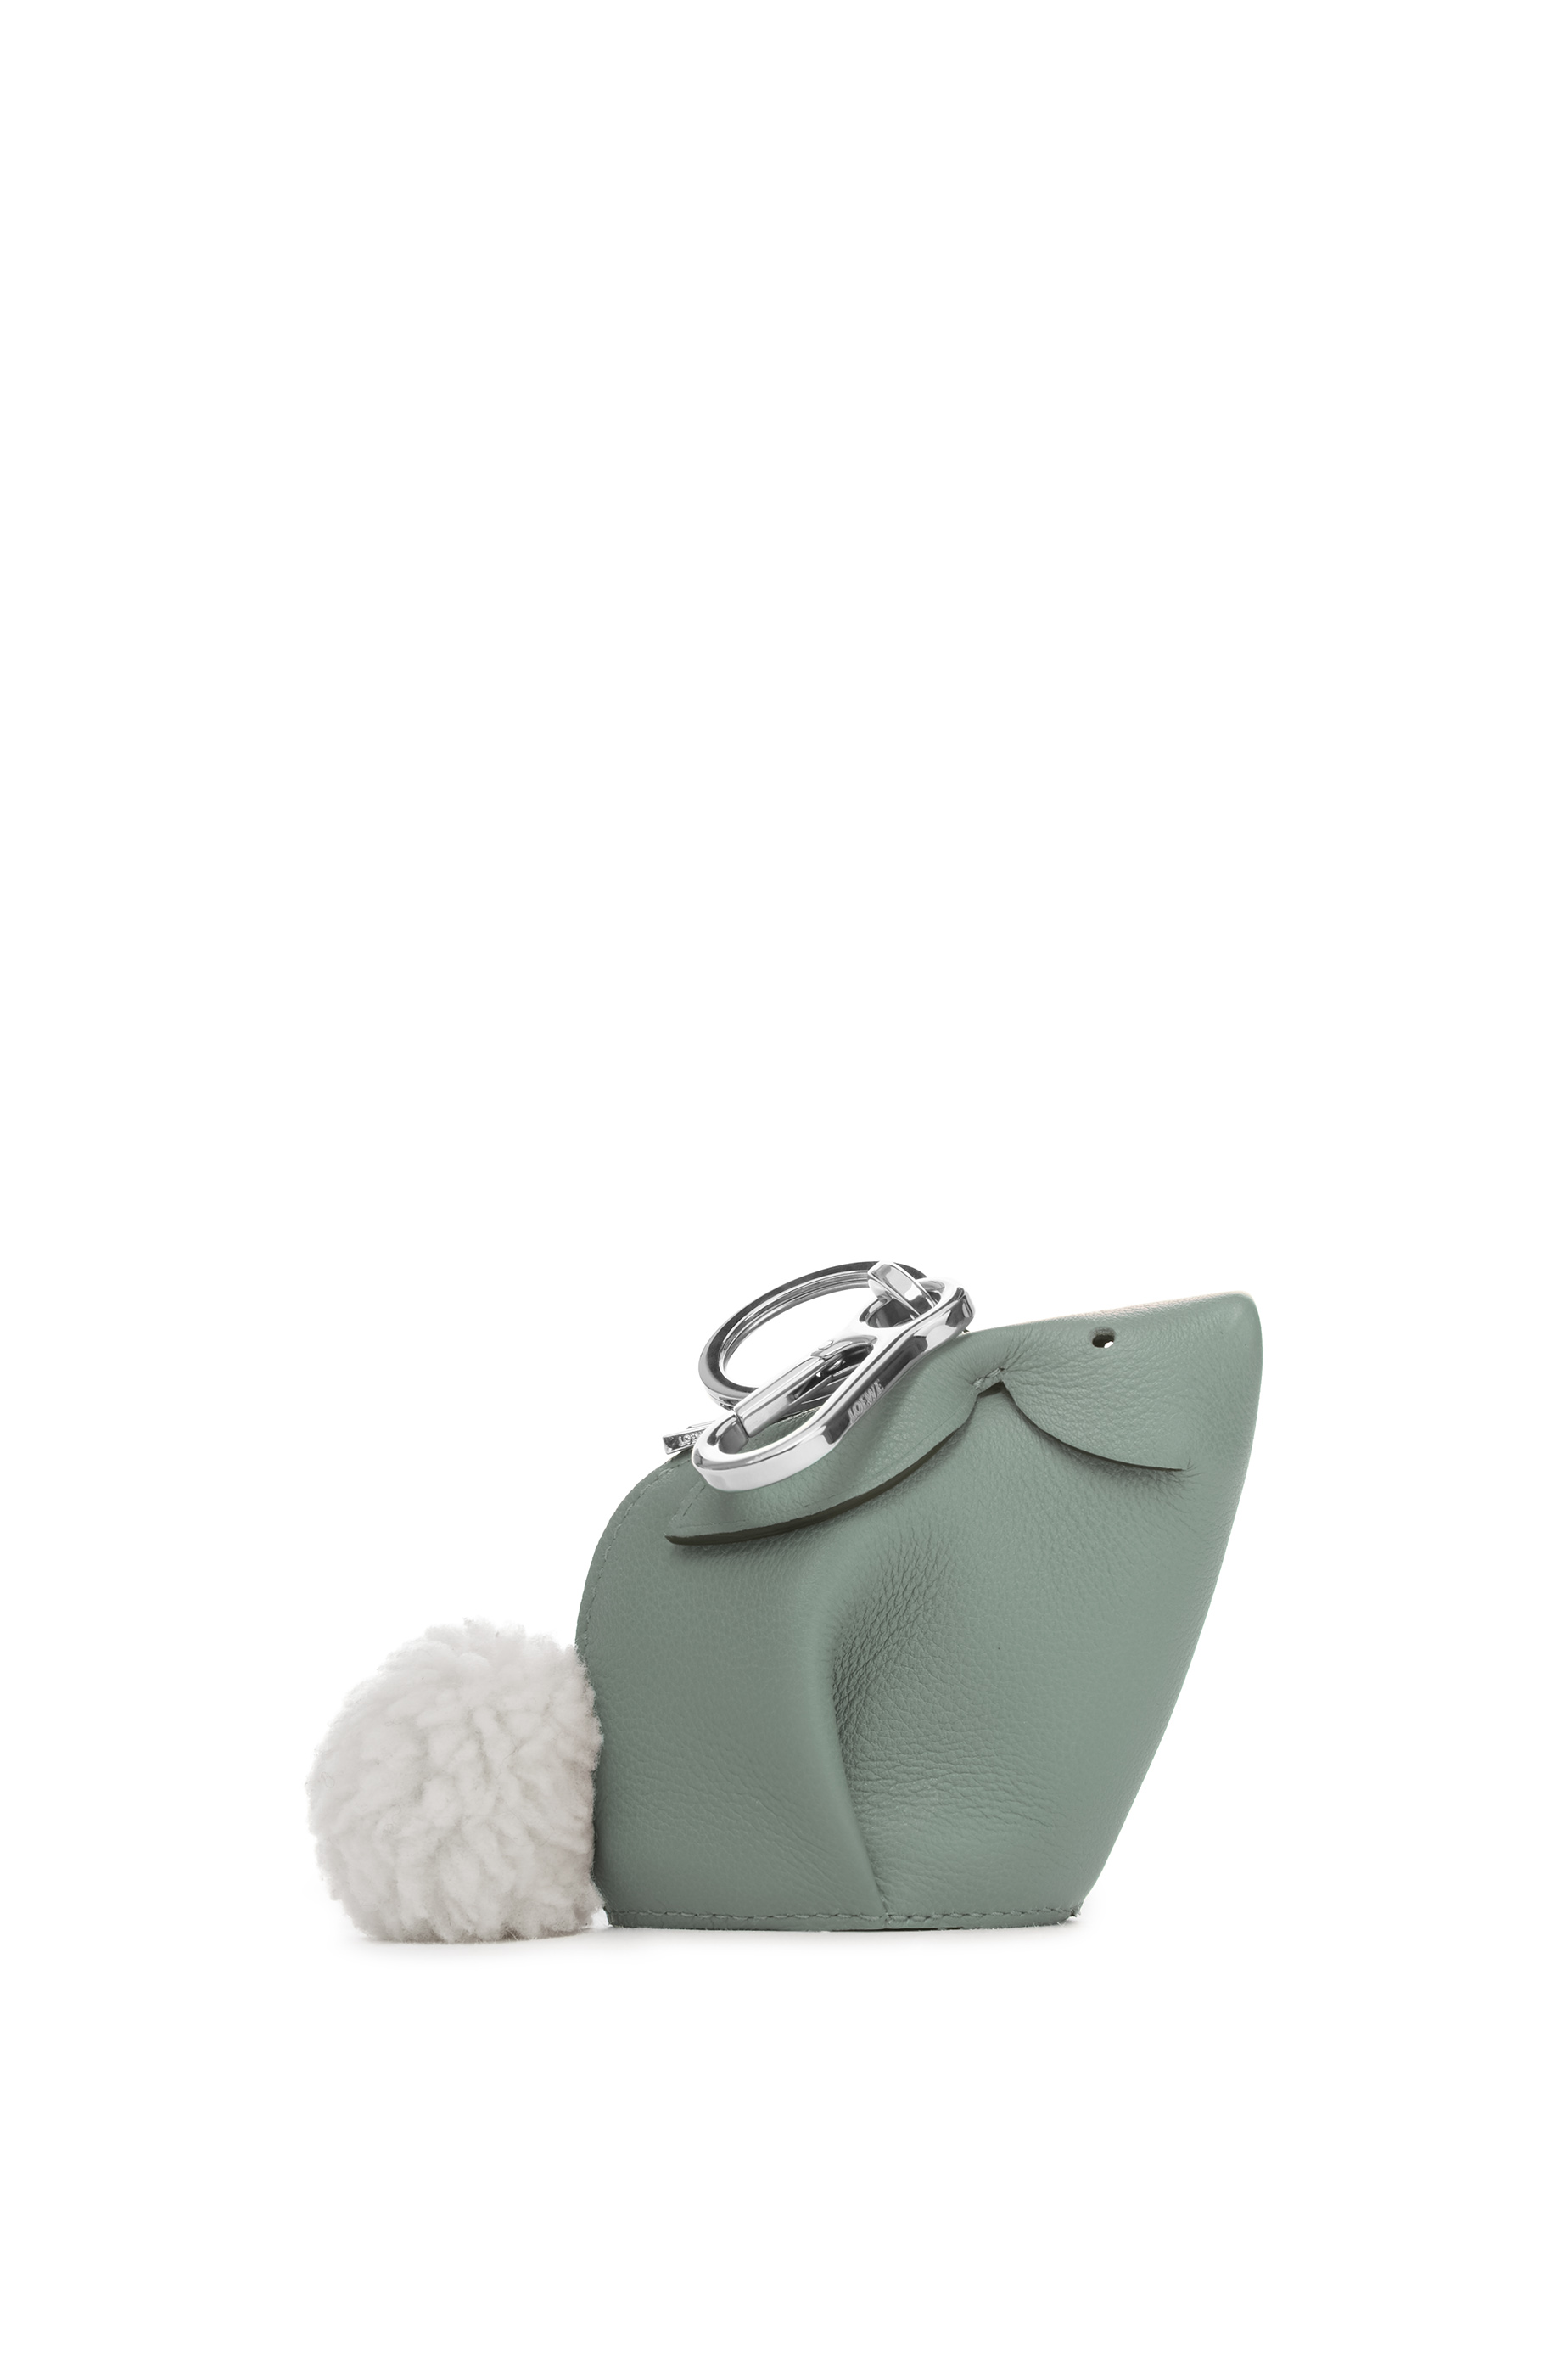 Bunny charm in classic calfskin Vetiver 